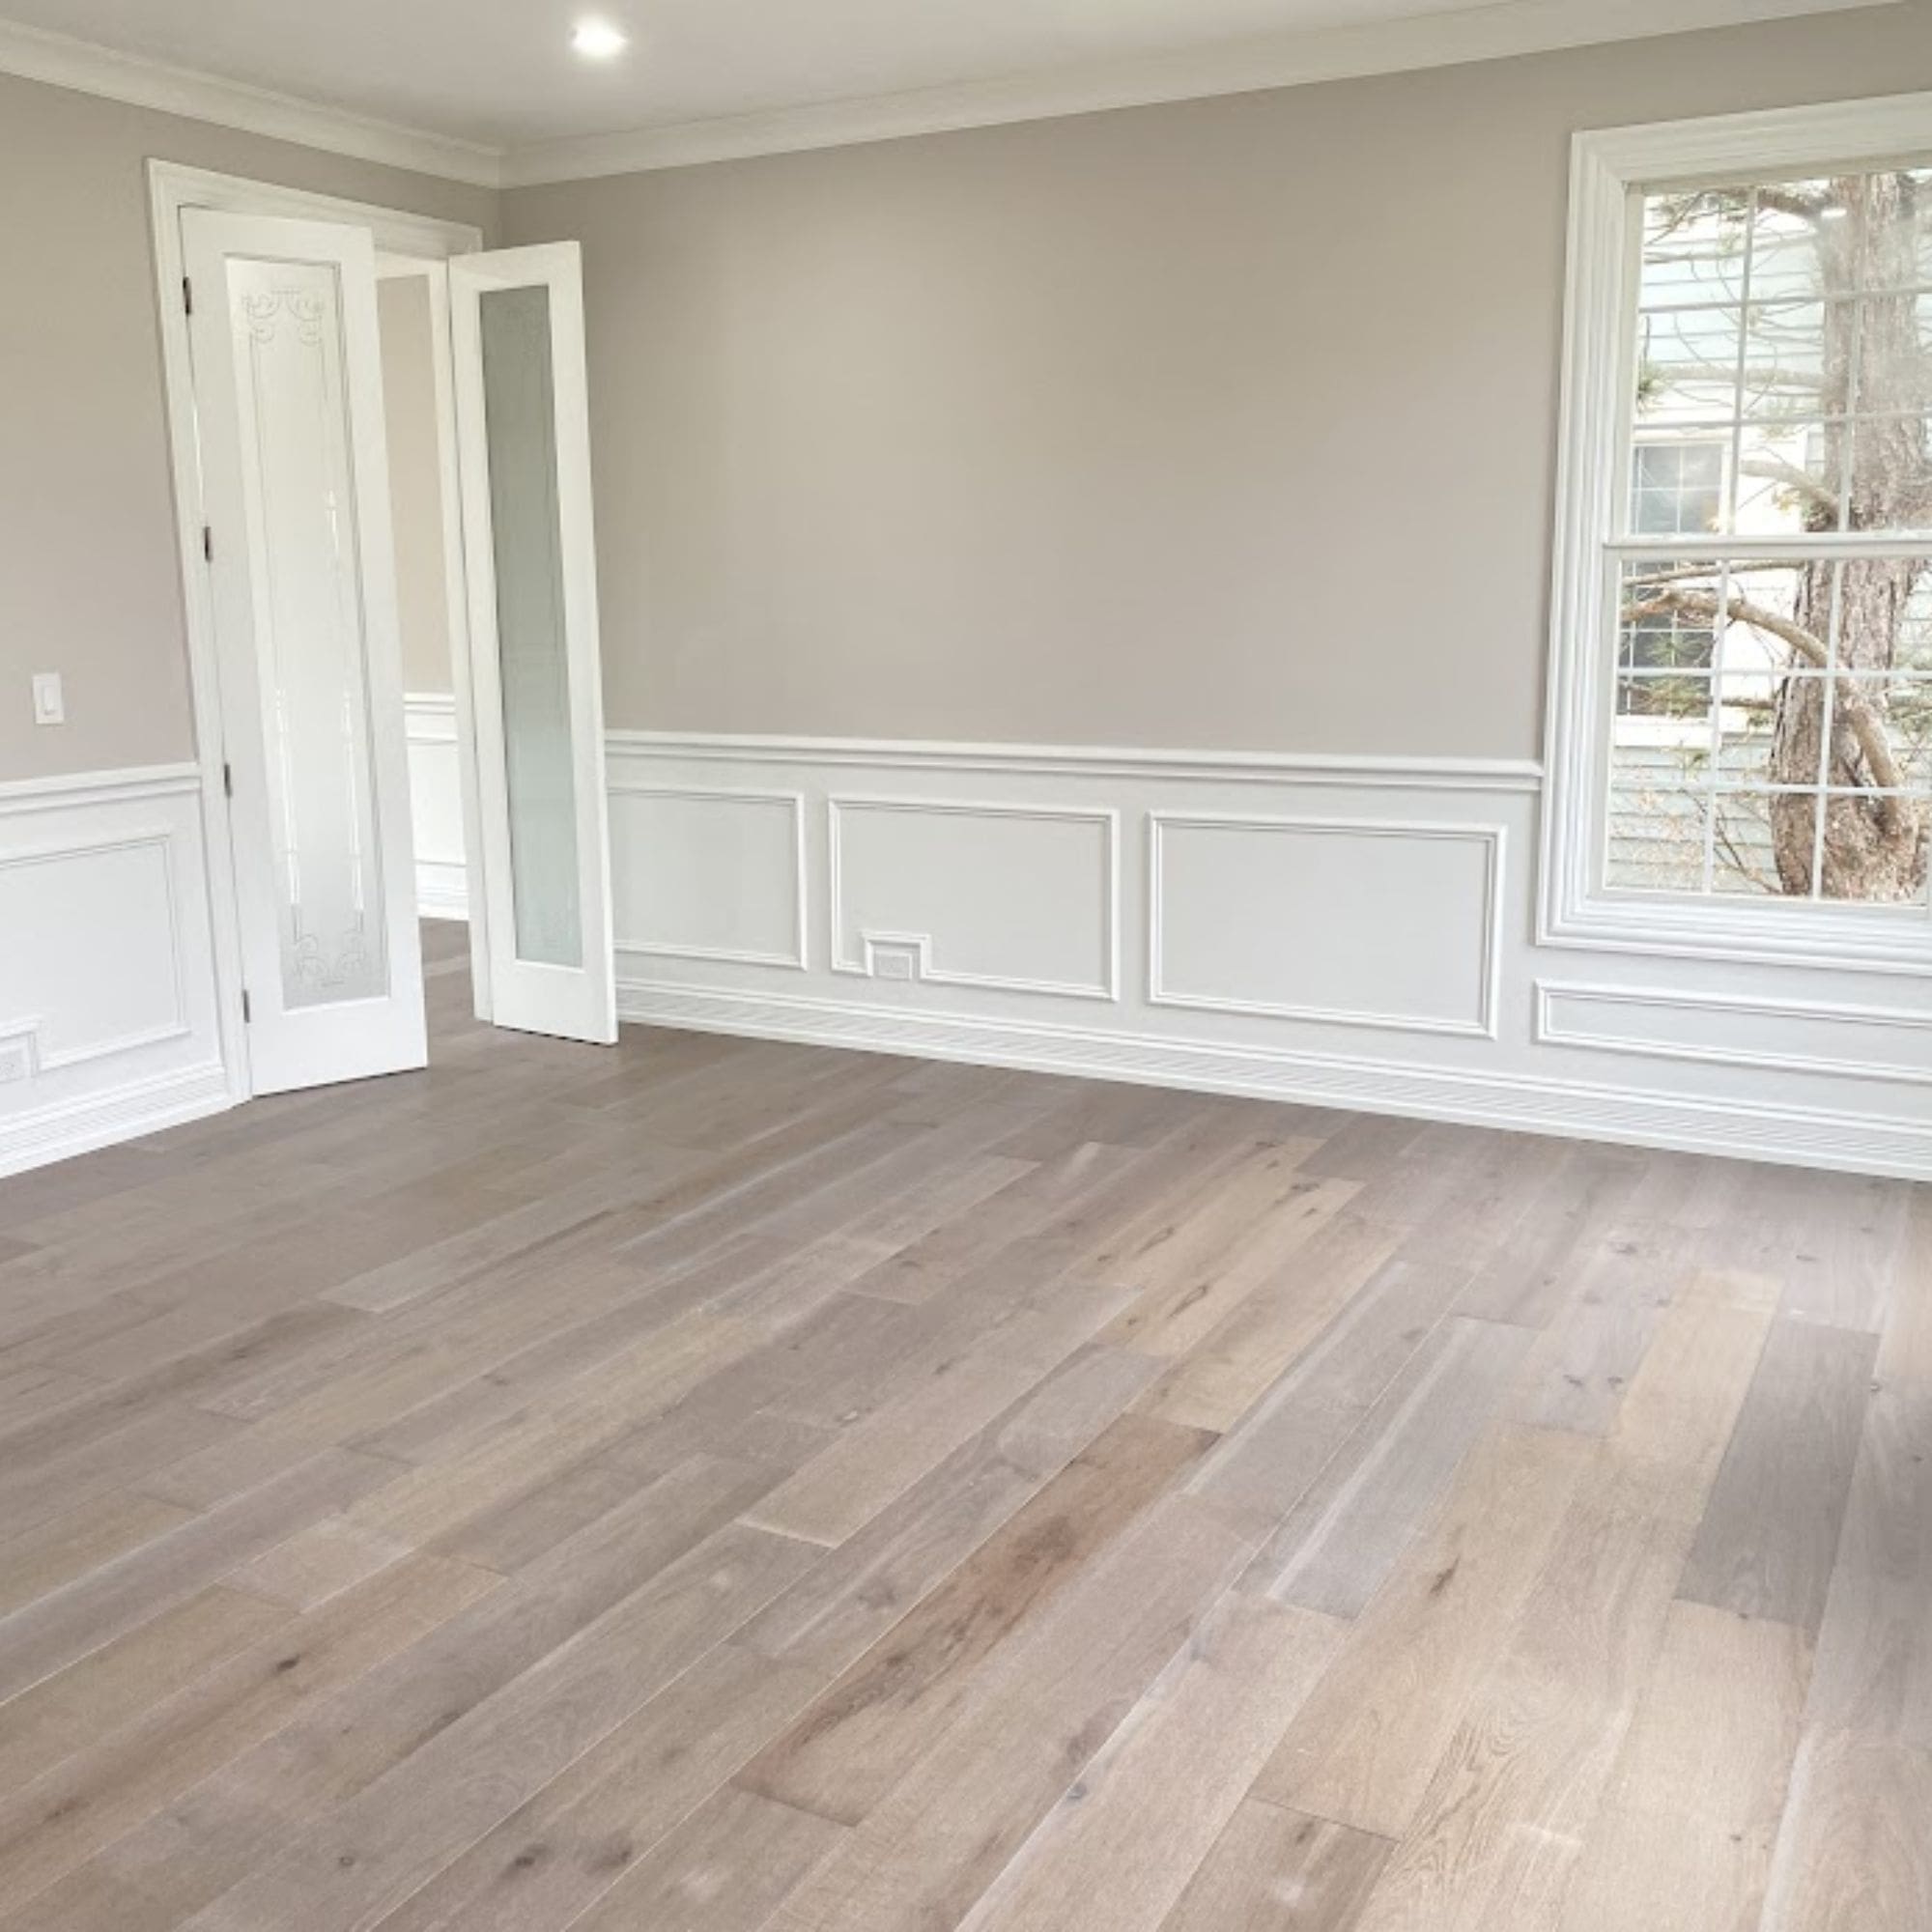 A vacant living area before the home staging process begins